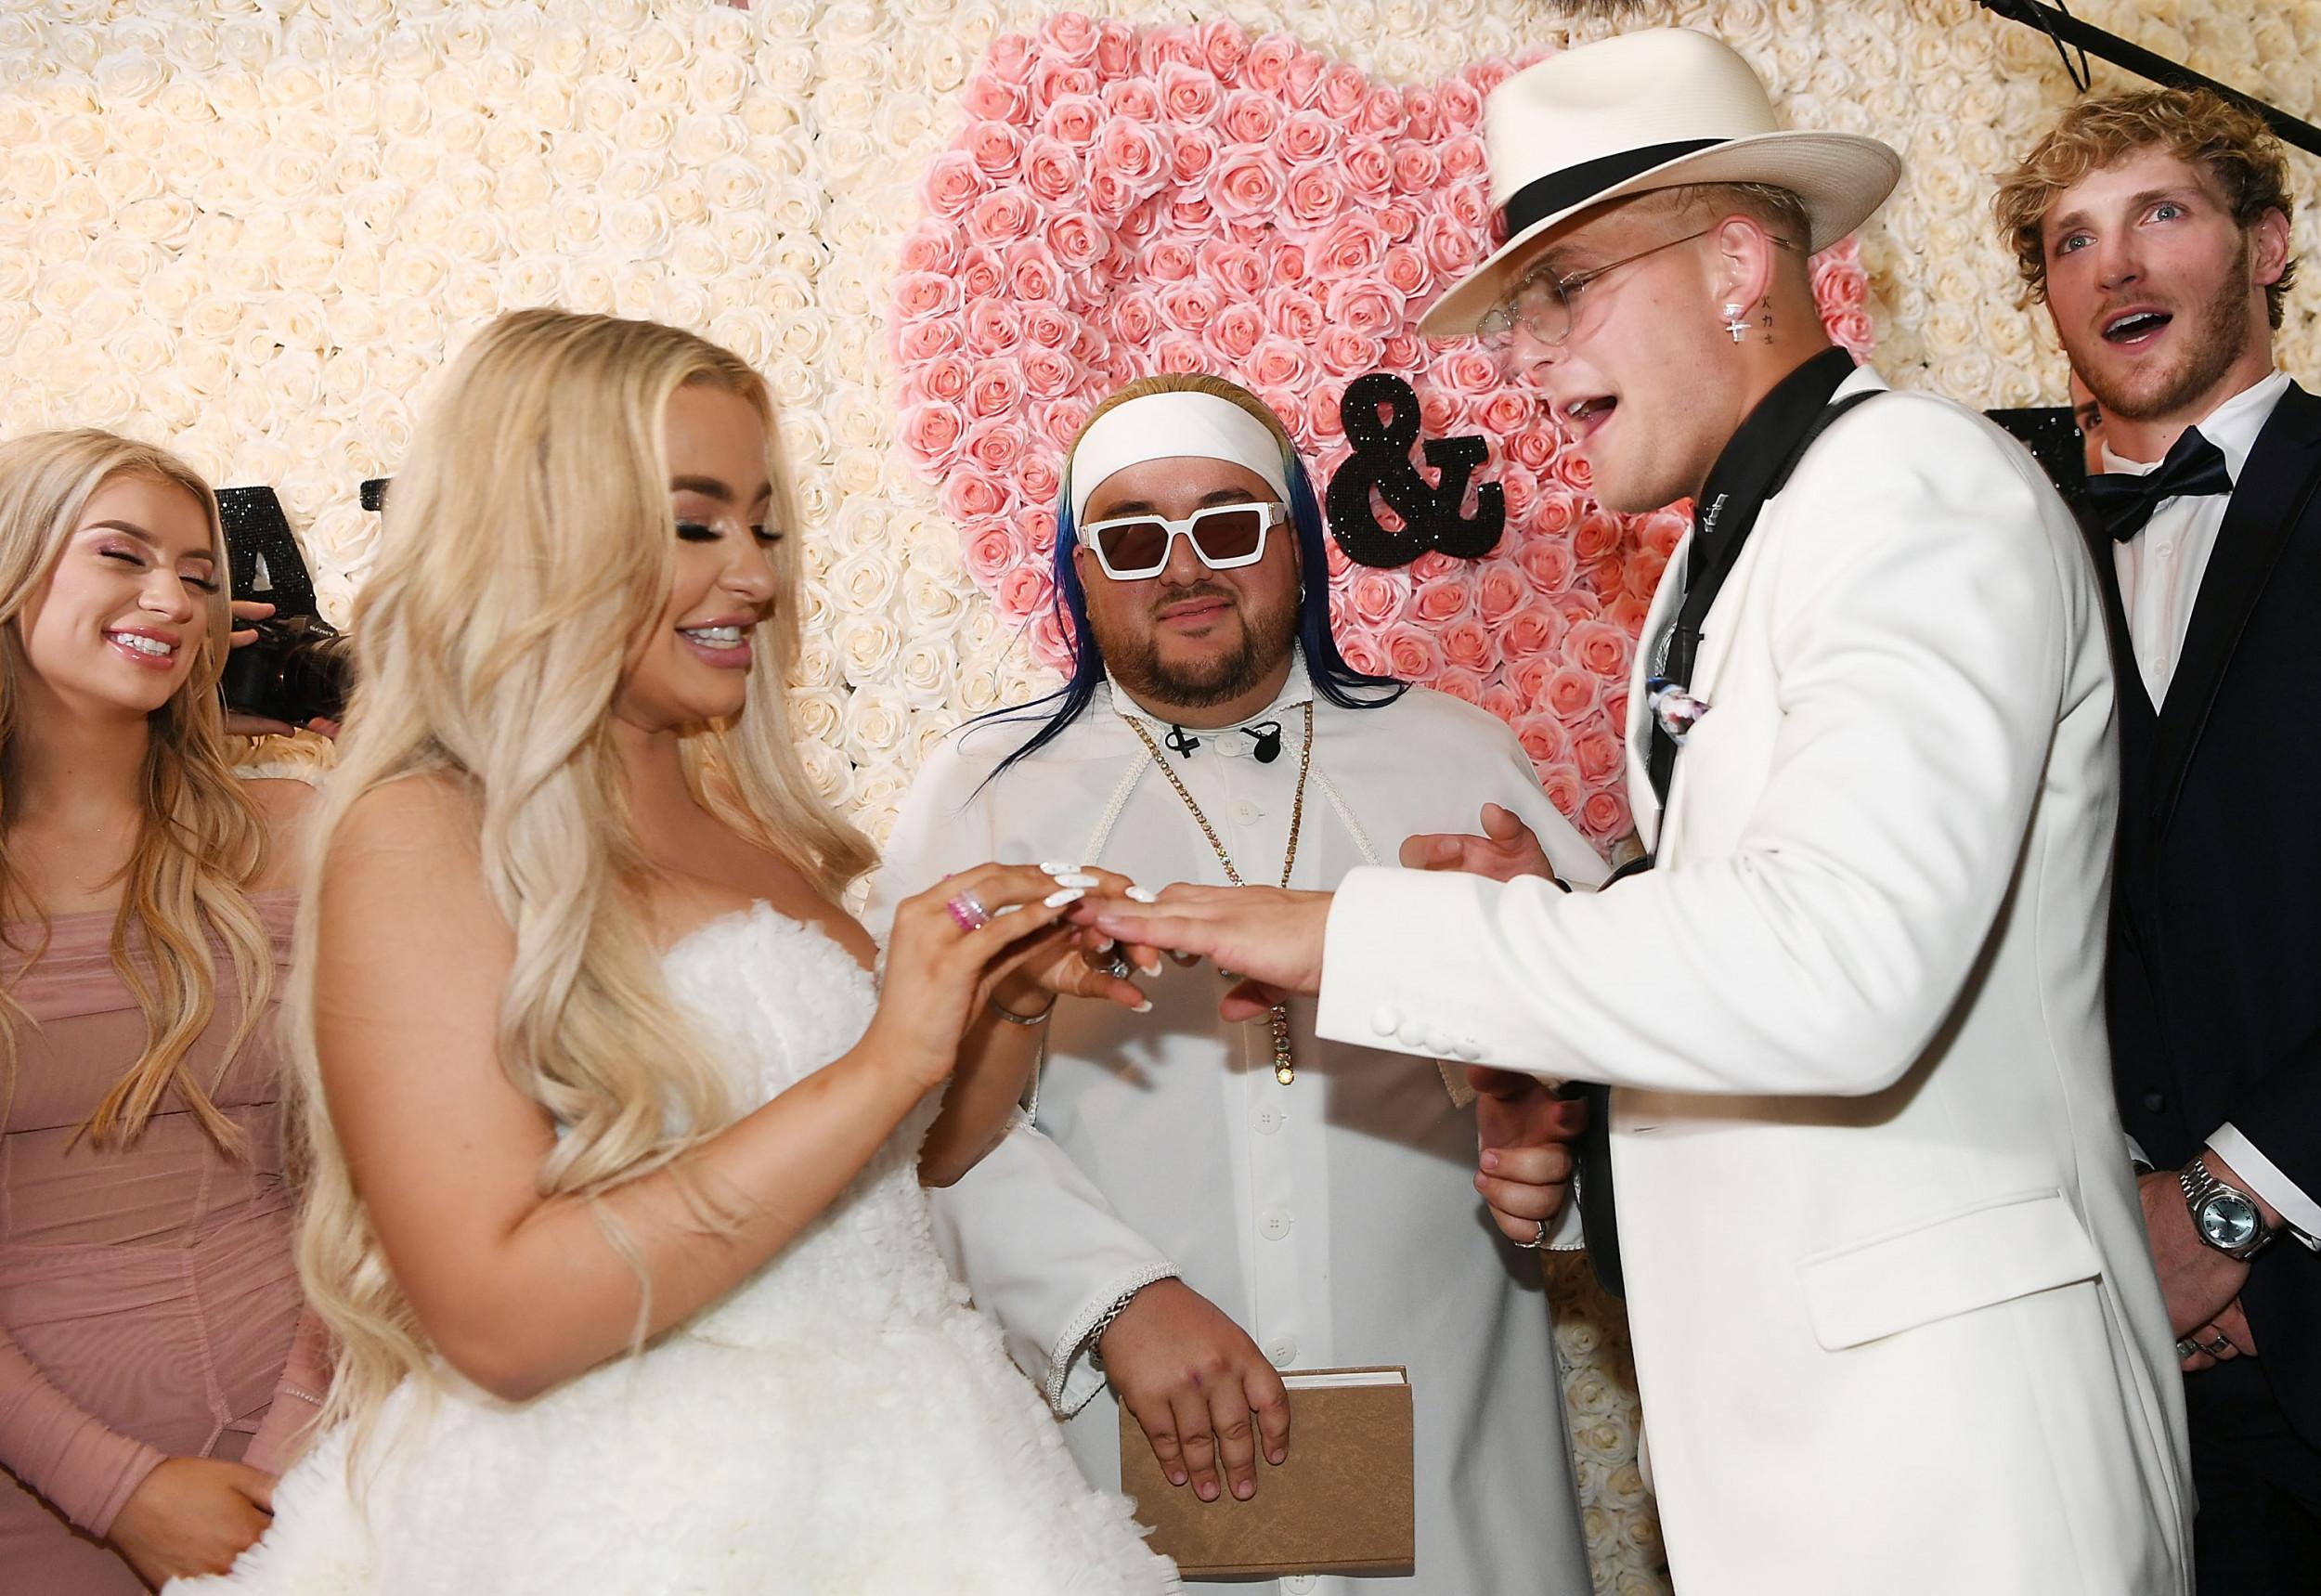 Is Tana Mongeau's Marriage to Jake Paul Real? What The YouTube Stars